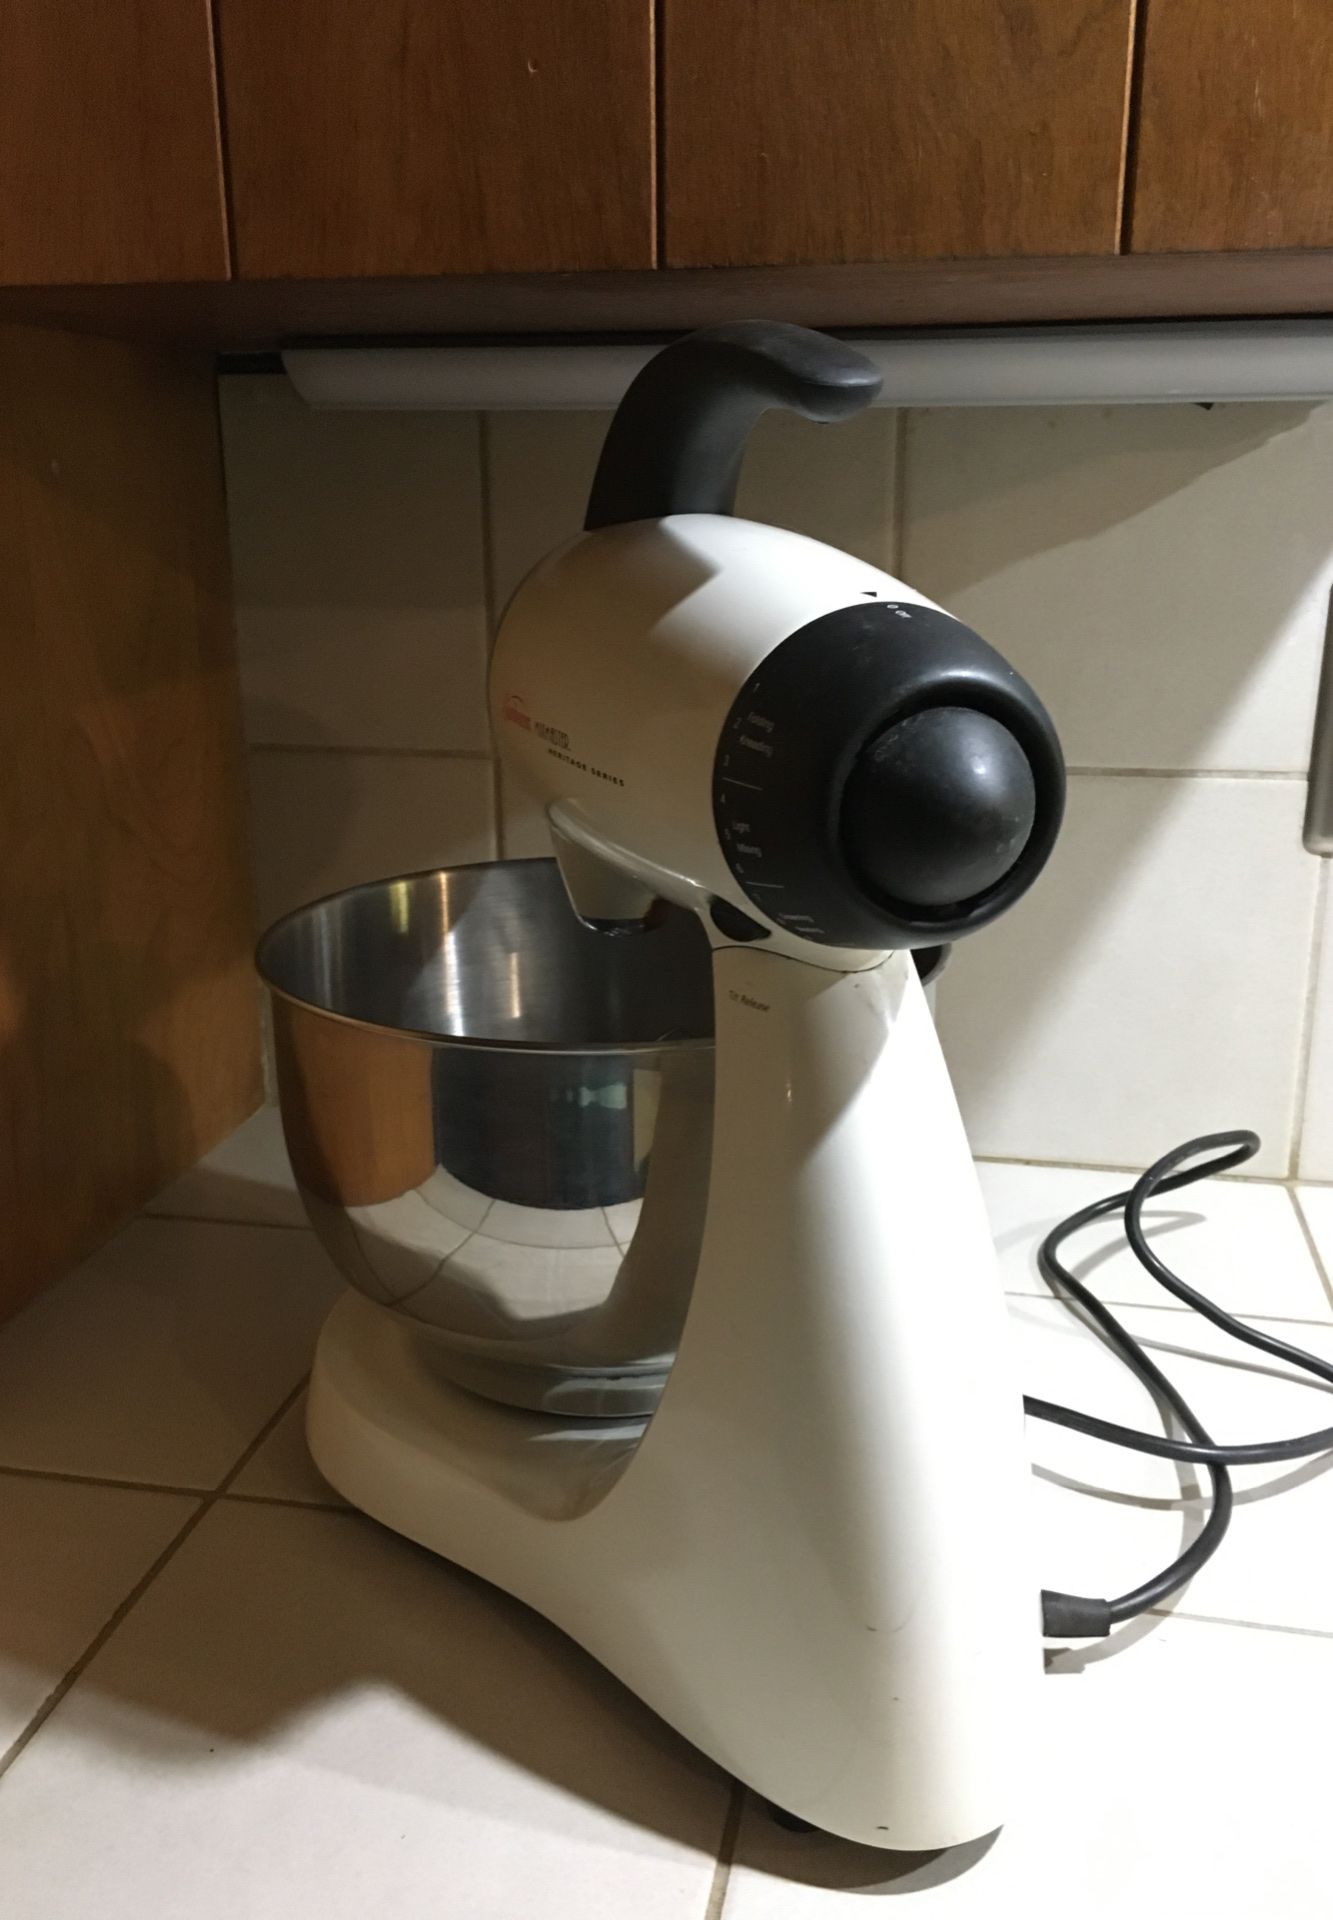 Vintage Sunbeam Mixmaster Stand Mixer Model# 2346 for Sale in